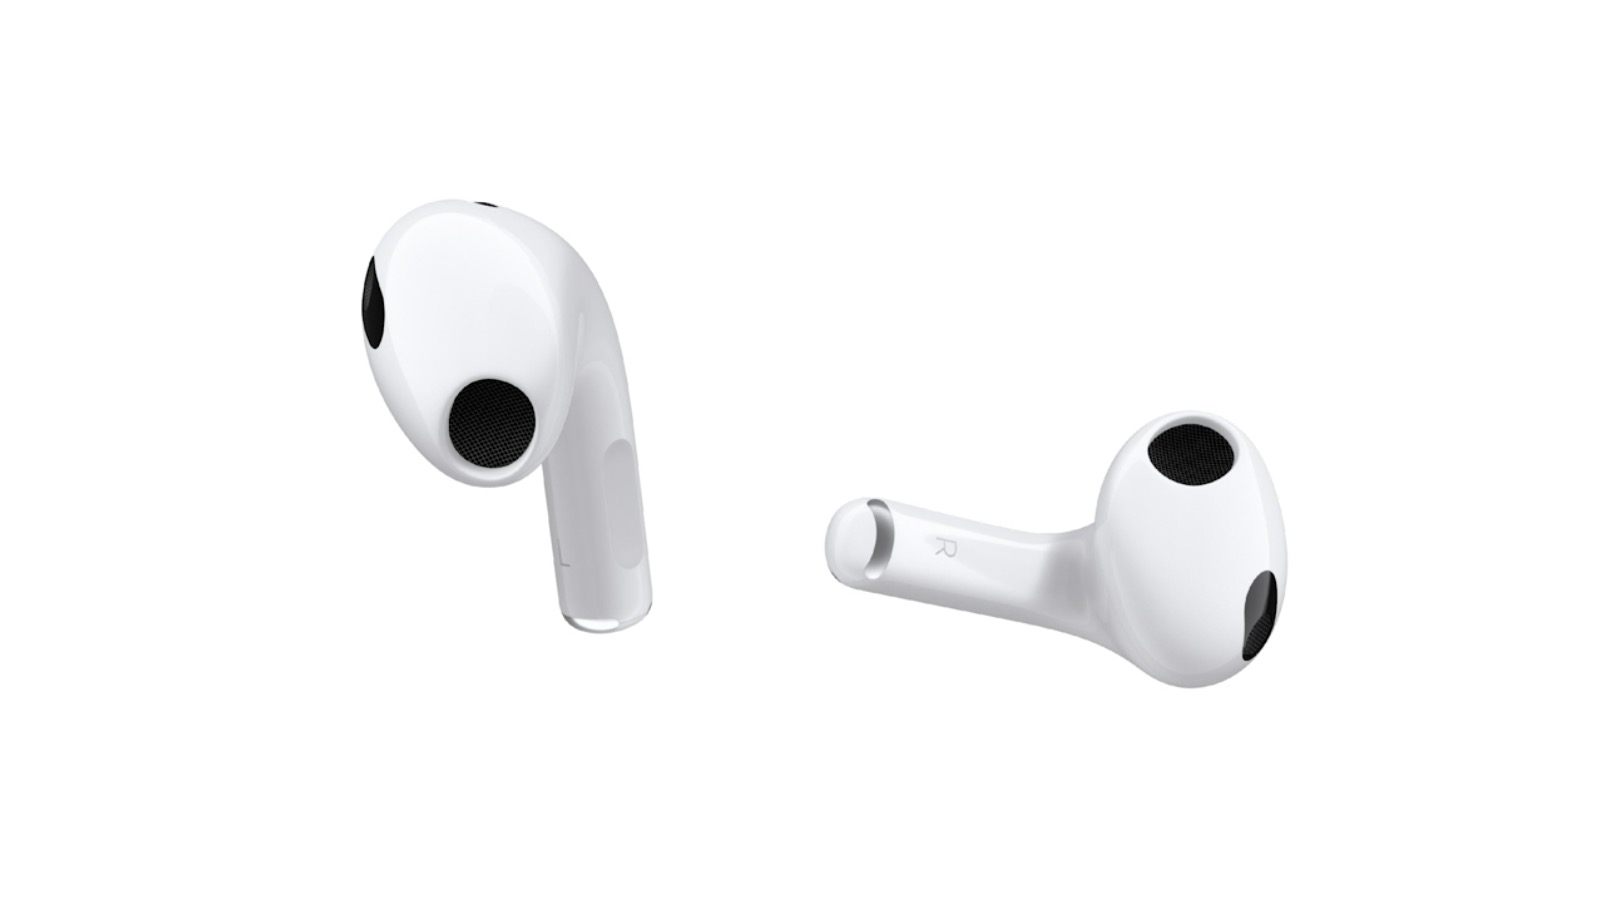 Apple's marketing image showing the left and right AirPod (third generation) set against a white background